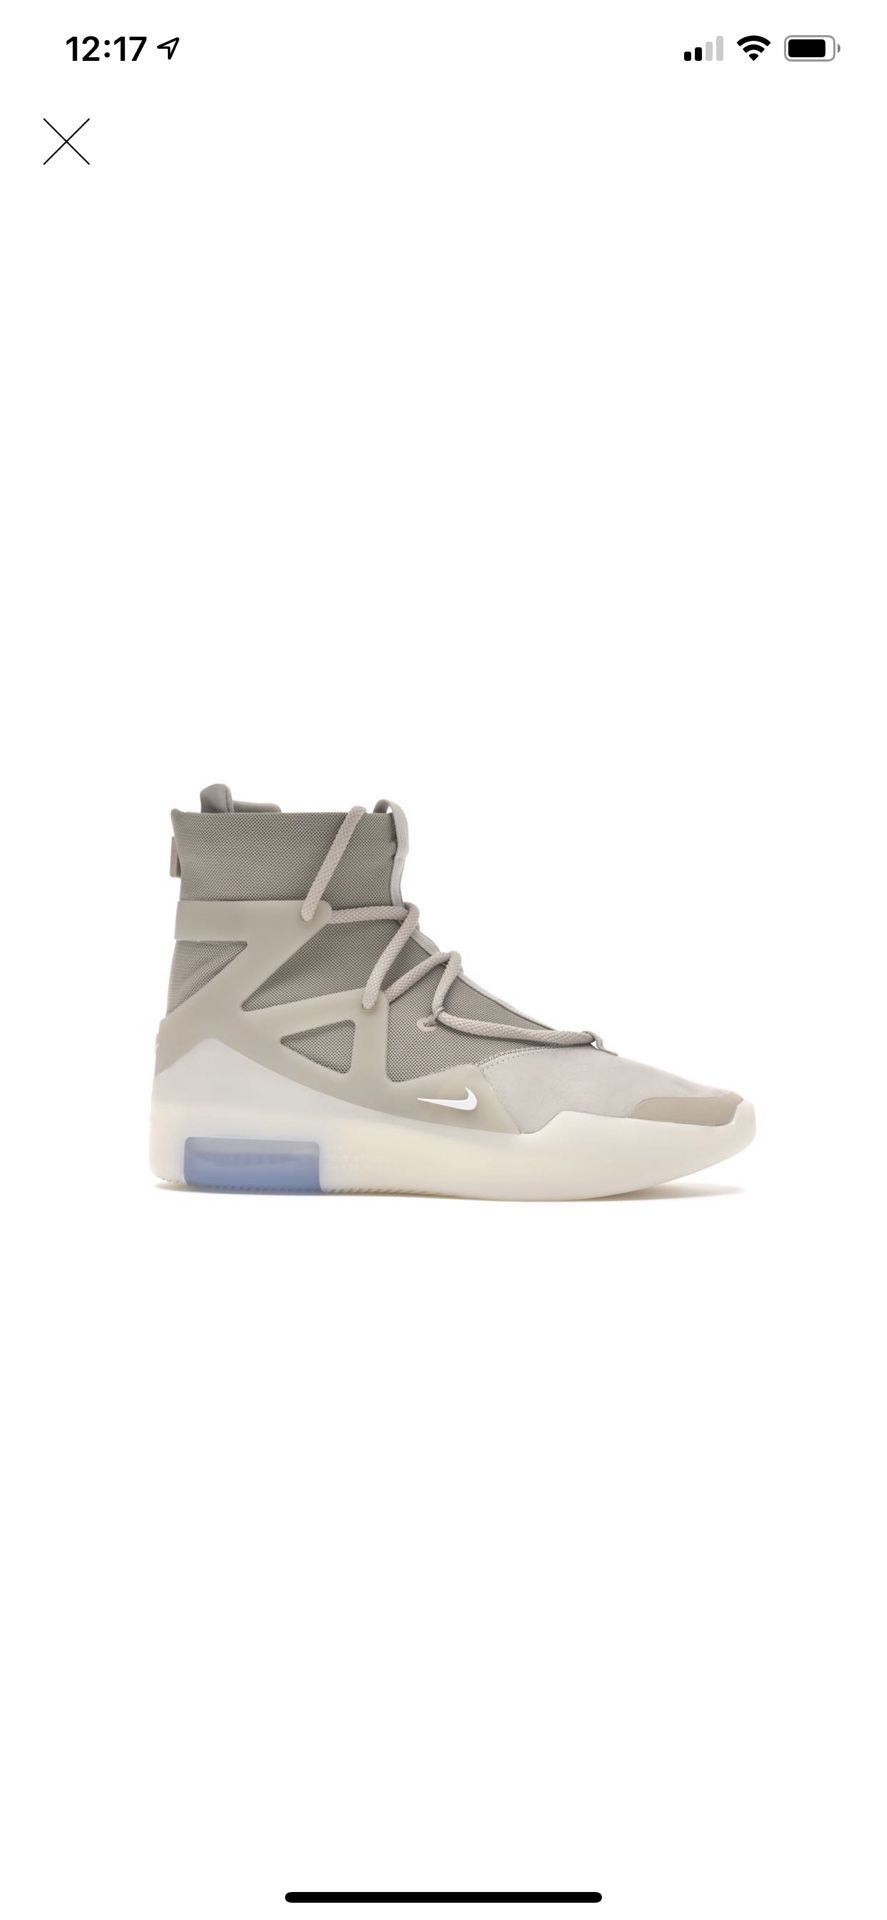 Fear of God x Nike Air 1 (size 7 and 7.5 avail now) Oatmeal color way ...